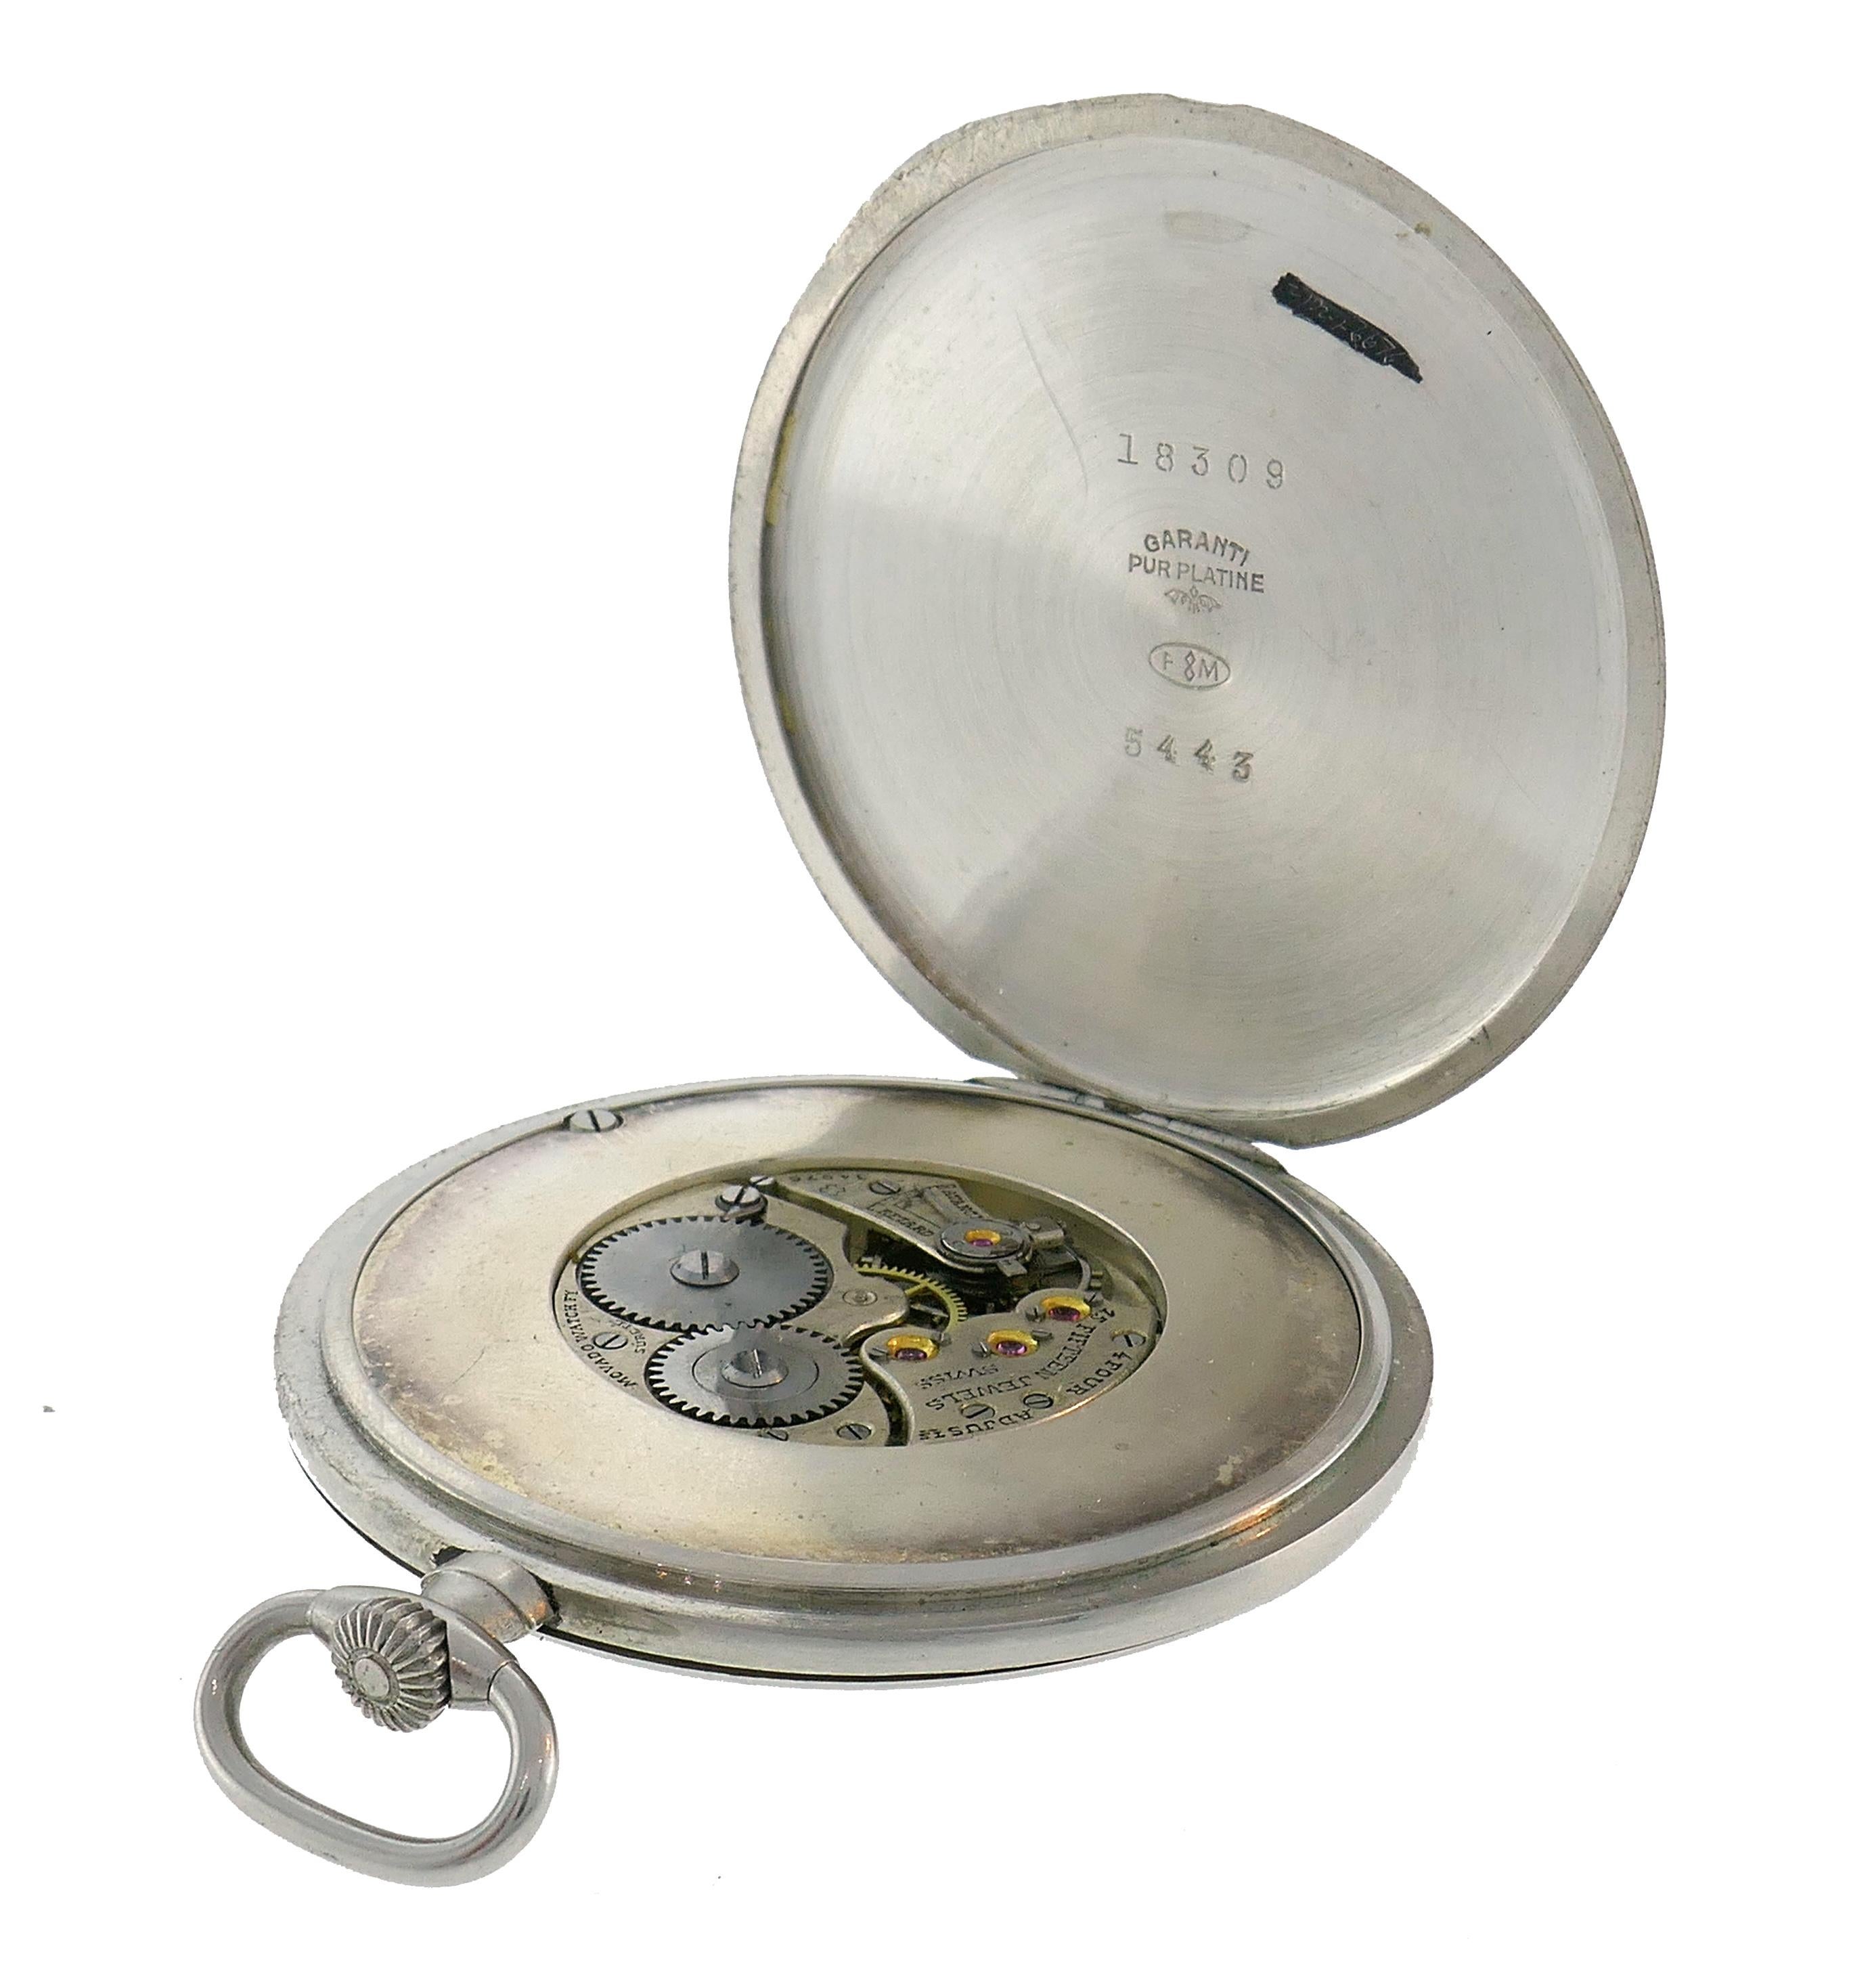 tiffany pocket watch serial numbers